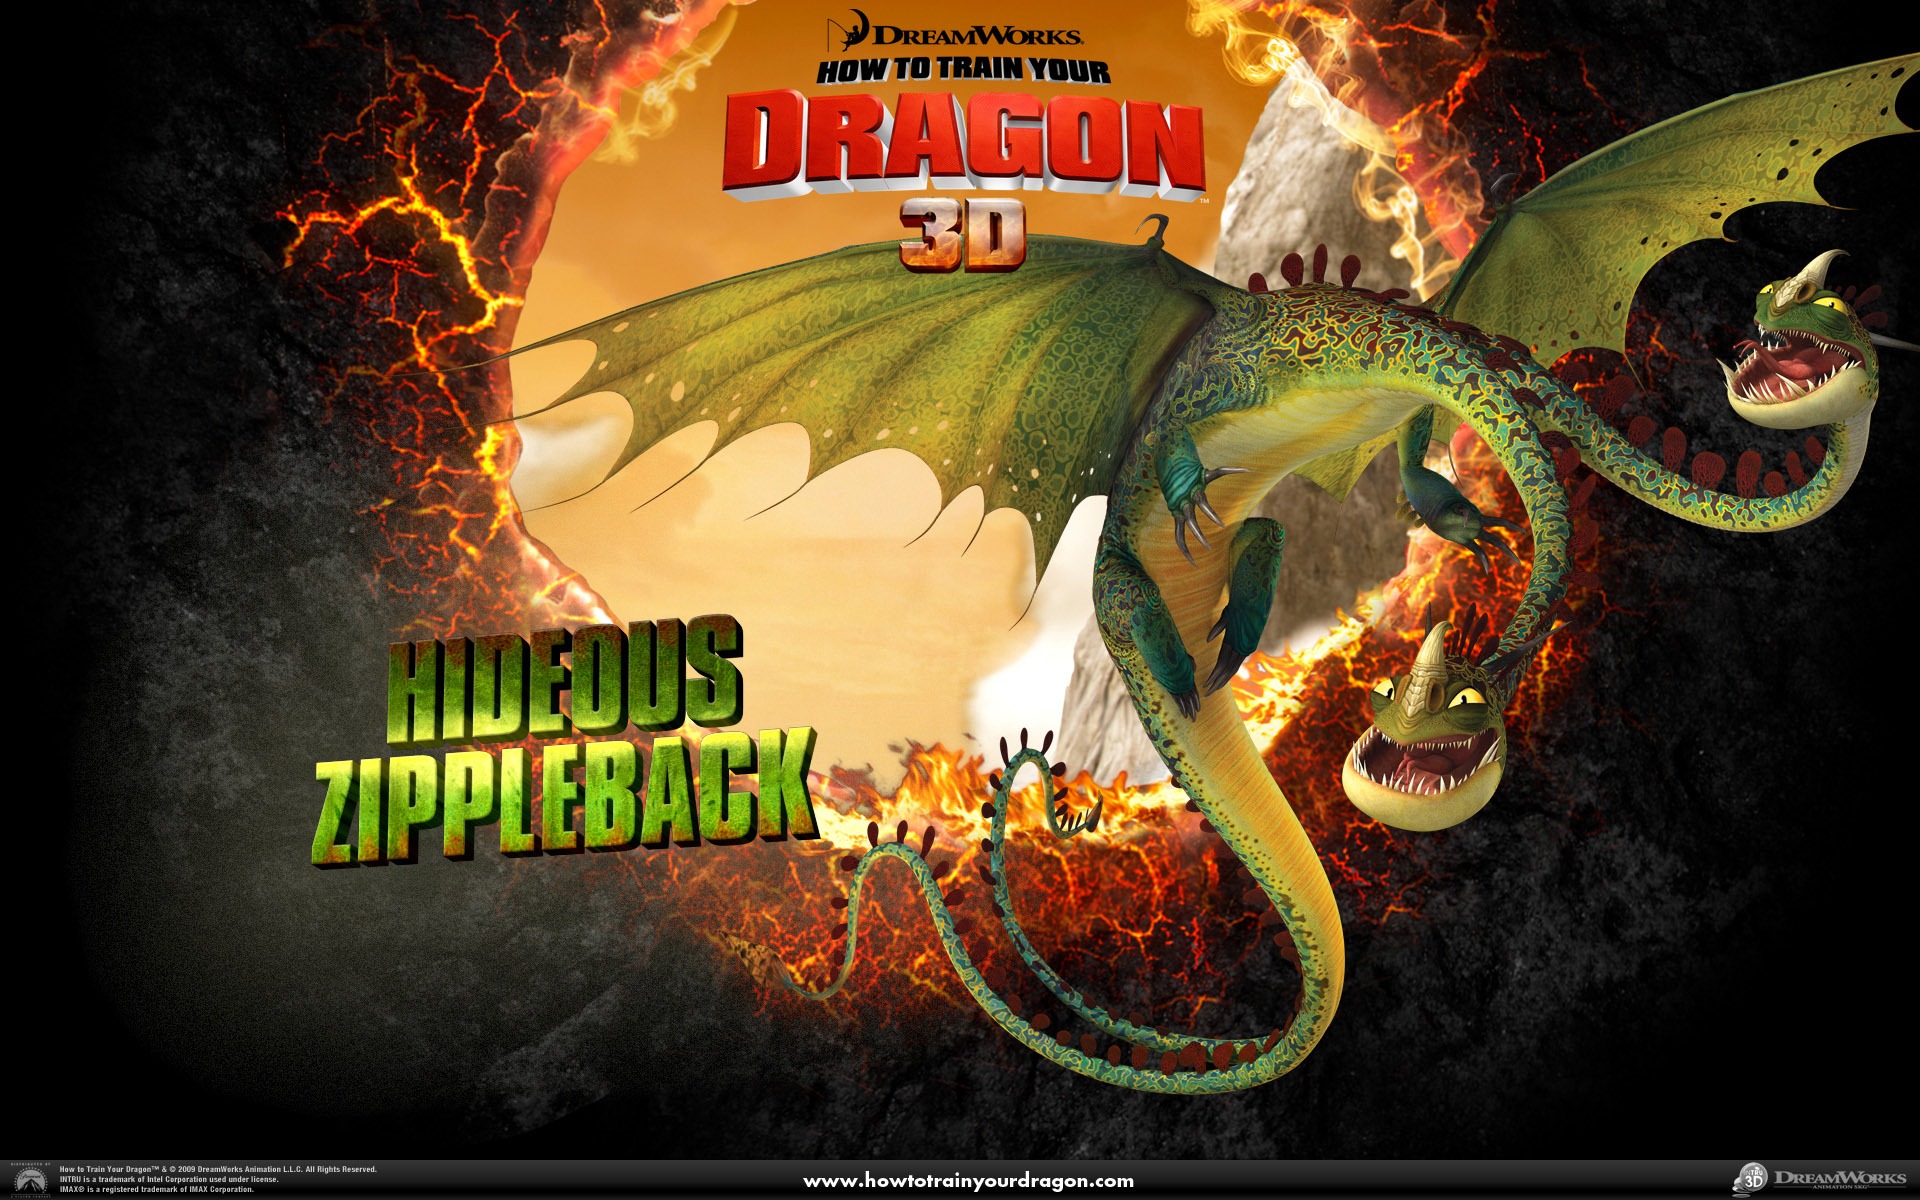 How to Train Your Dragon HD wallpaper #3 - 1920x1200